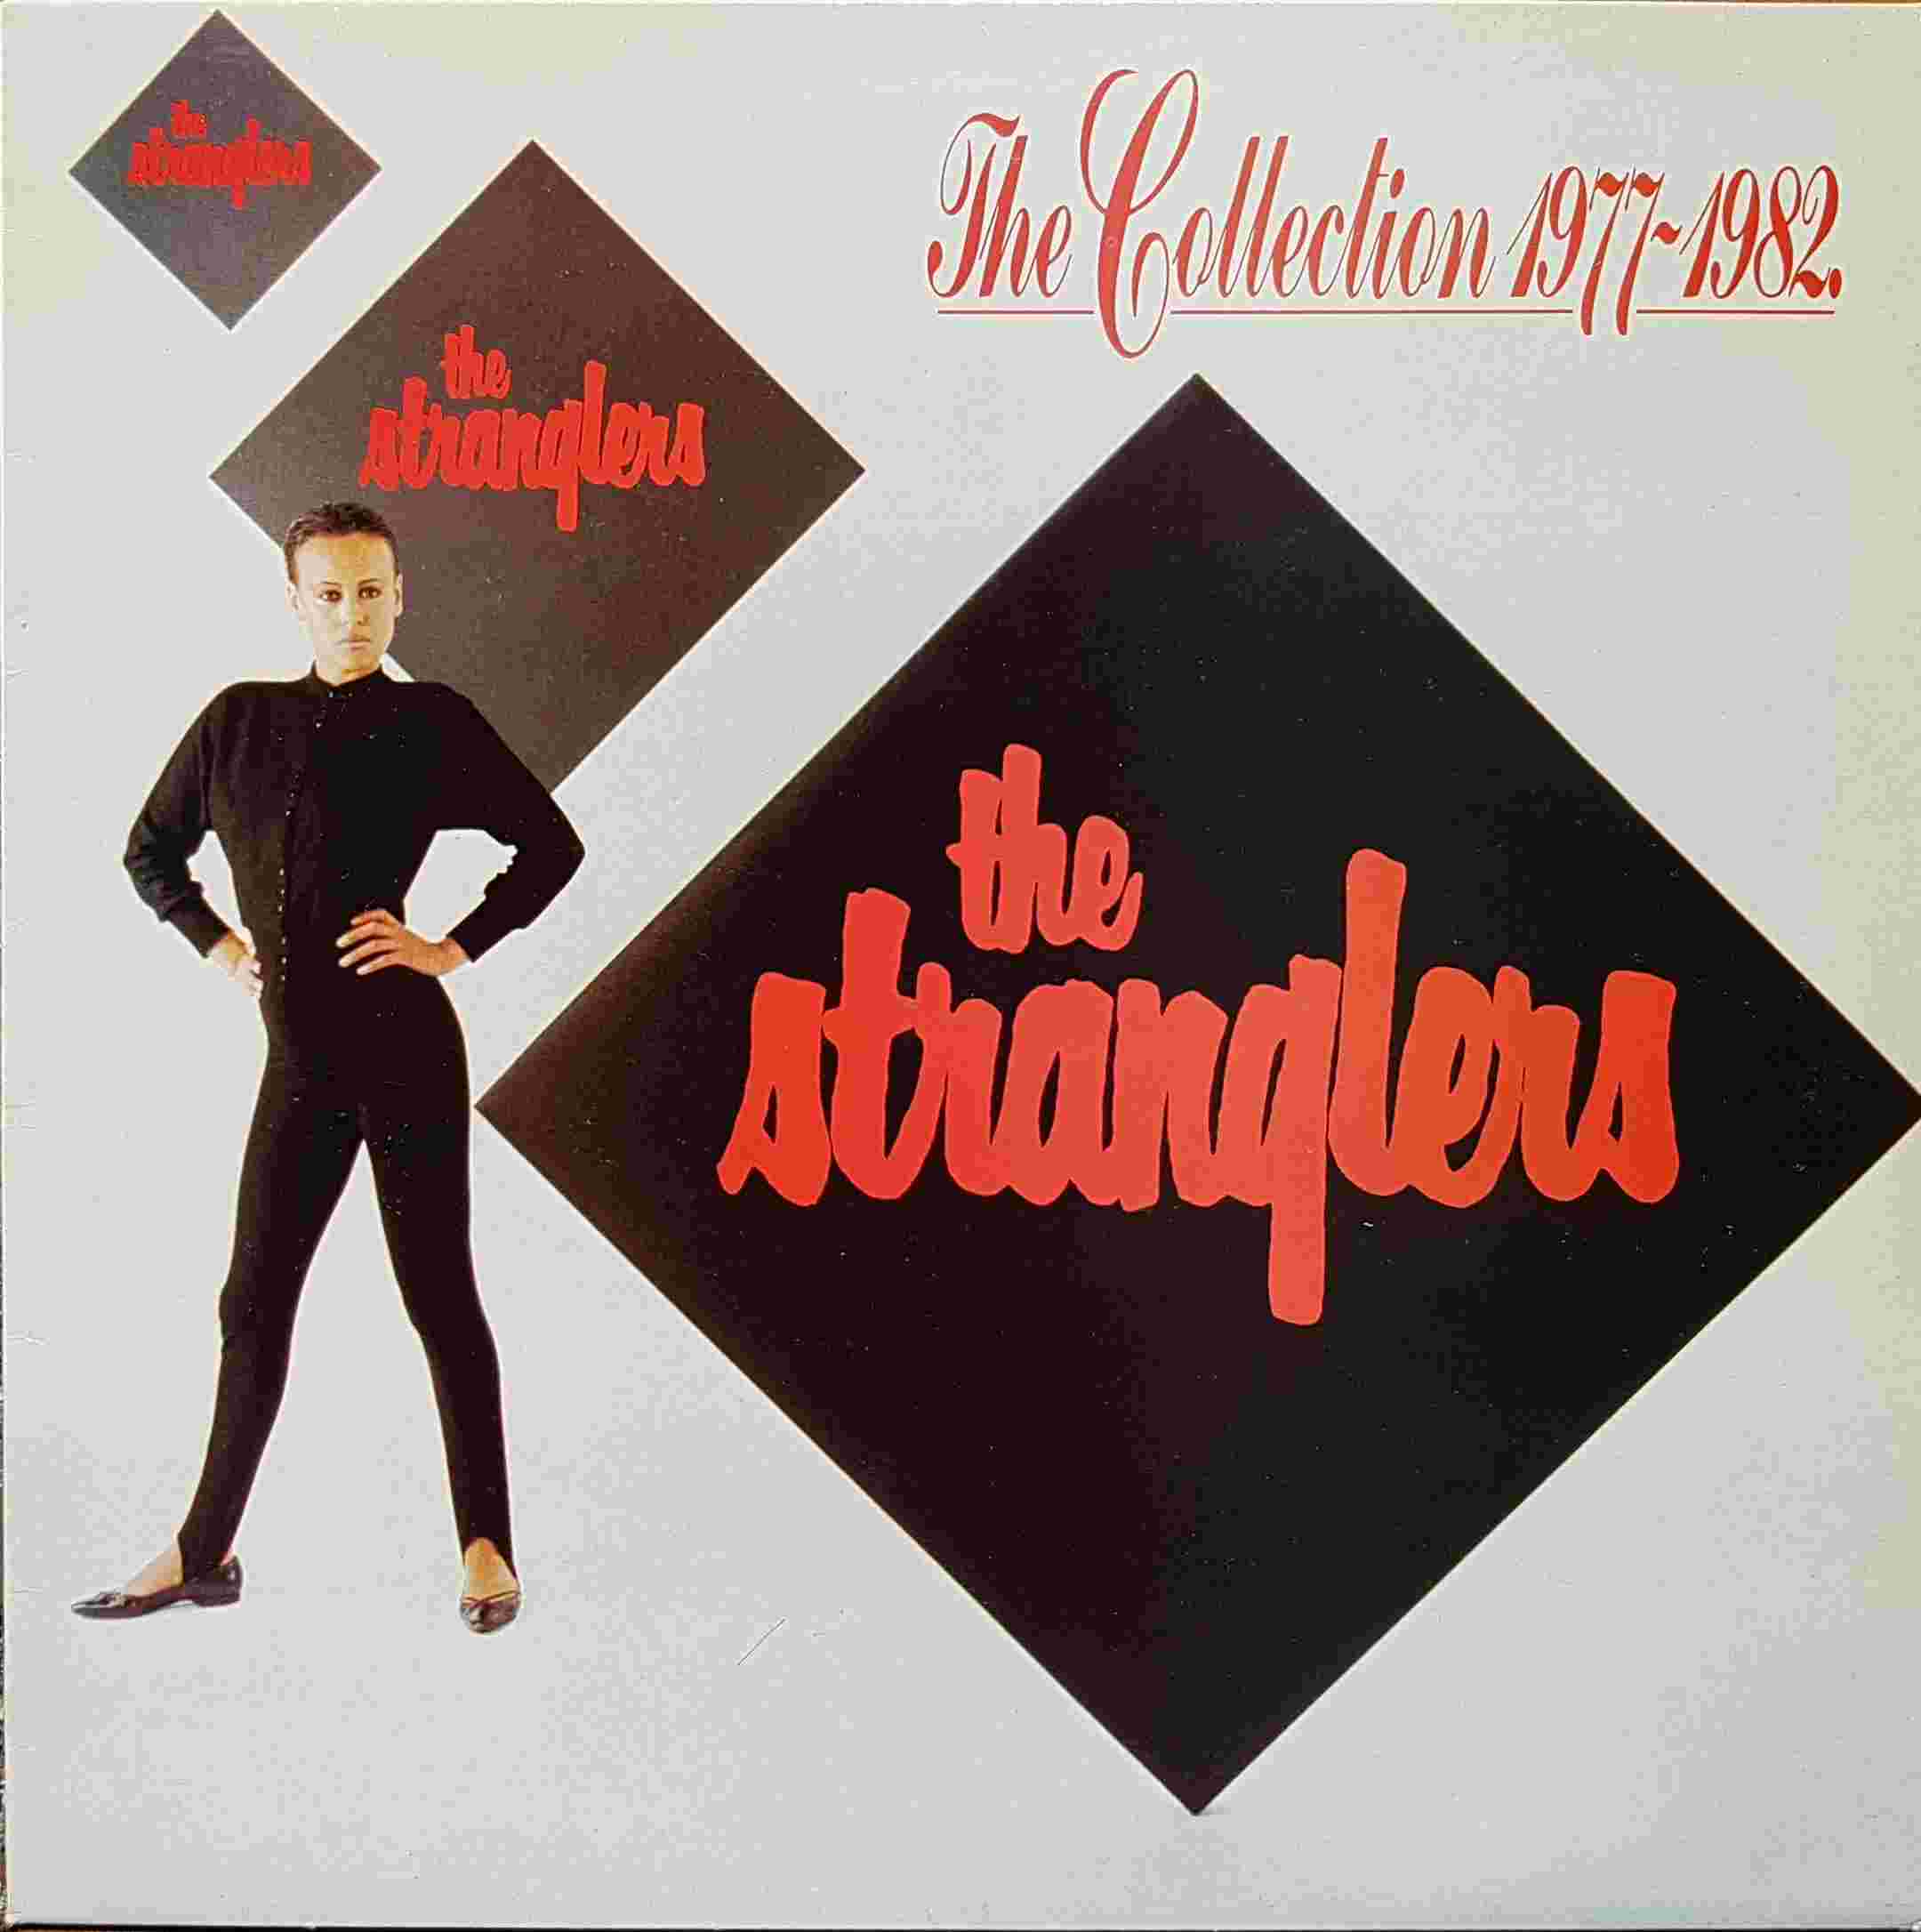 Picture of LBG 30353 The collection 1977 - 1982 by artist The Stranglers